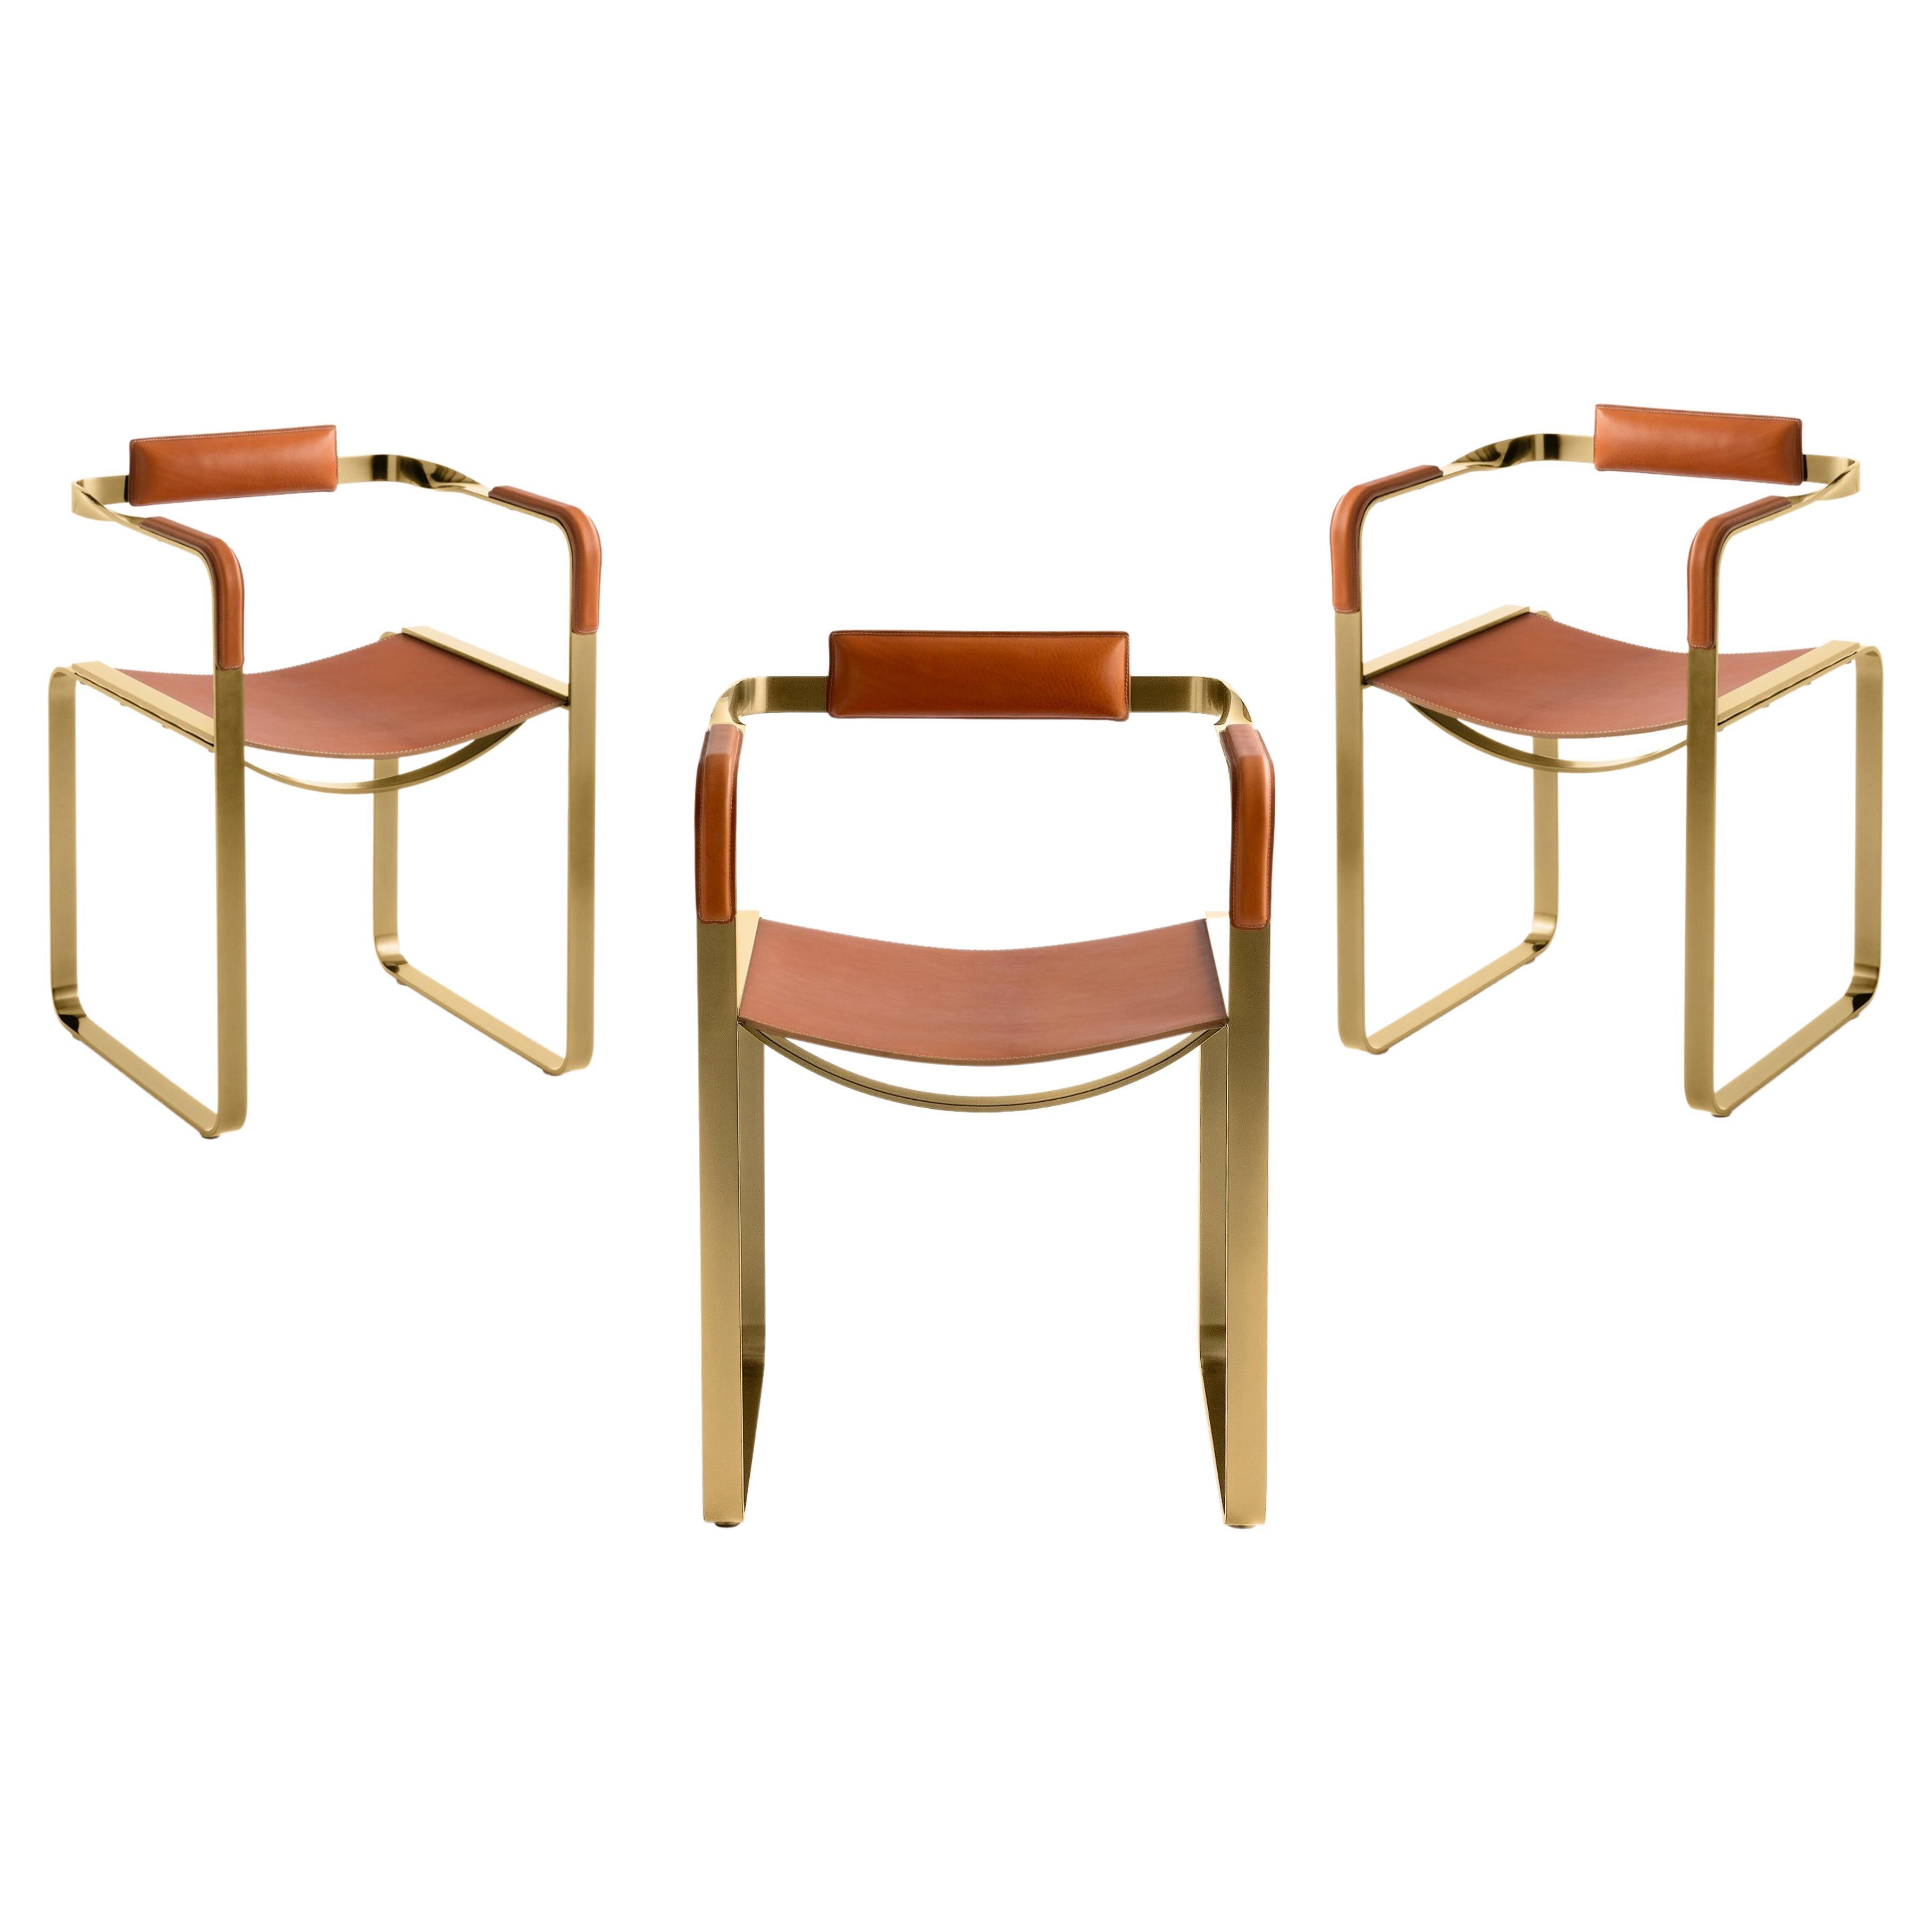 Set of 3 Armchair, Aged Brass Steel & Natural Tobacco Saddle, Contemporary Style For Sale